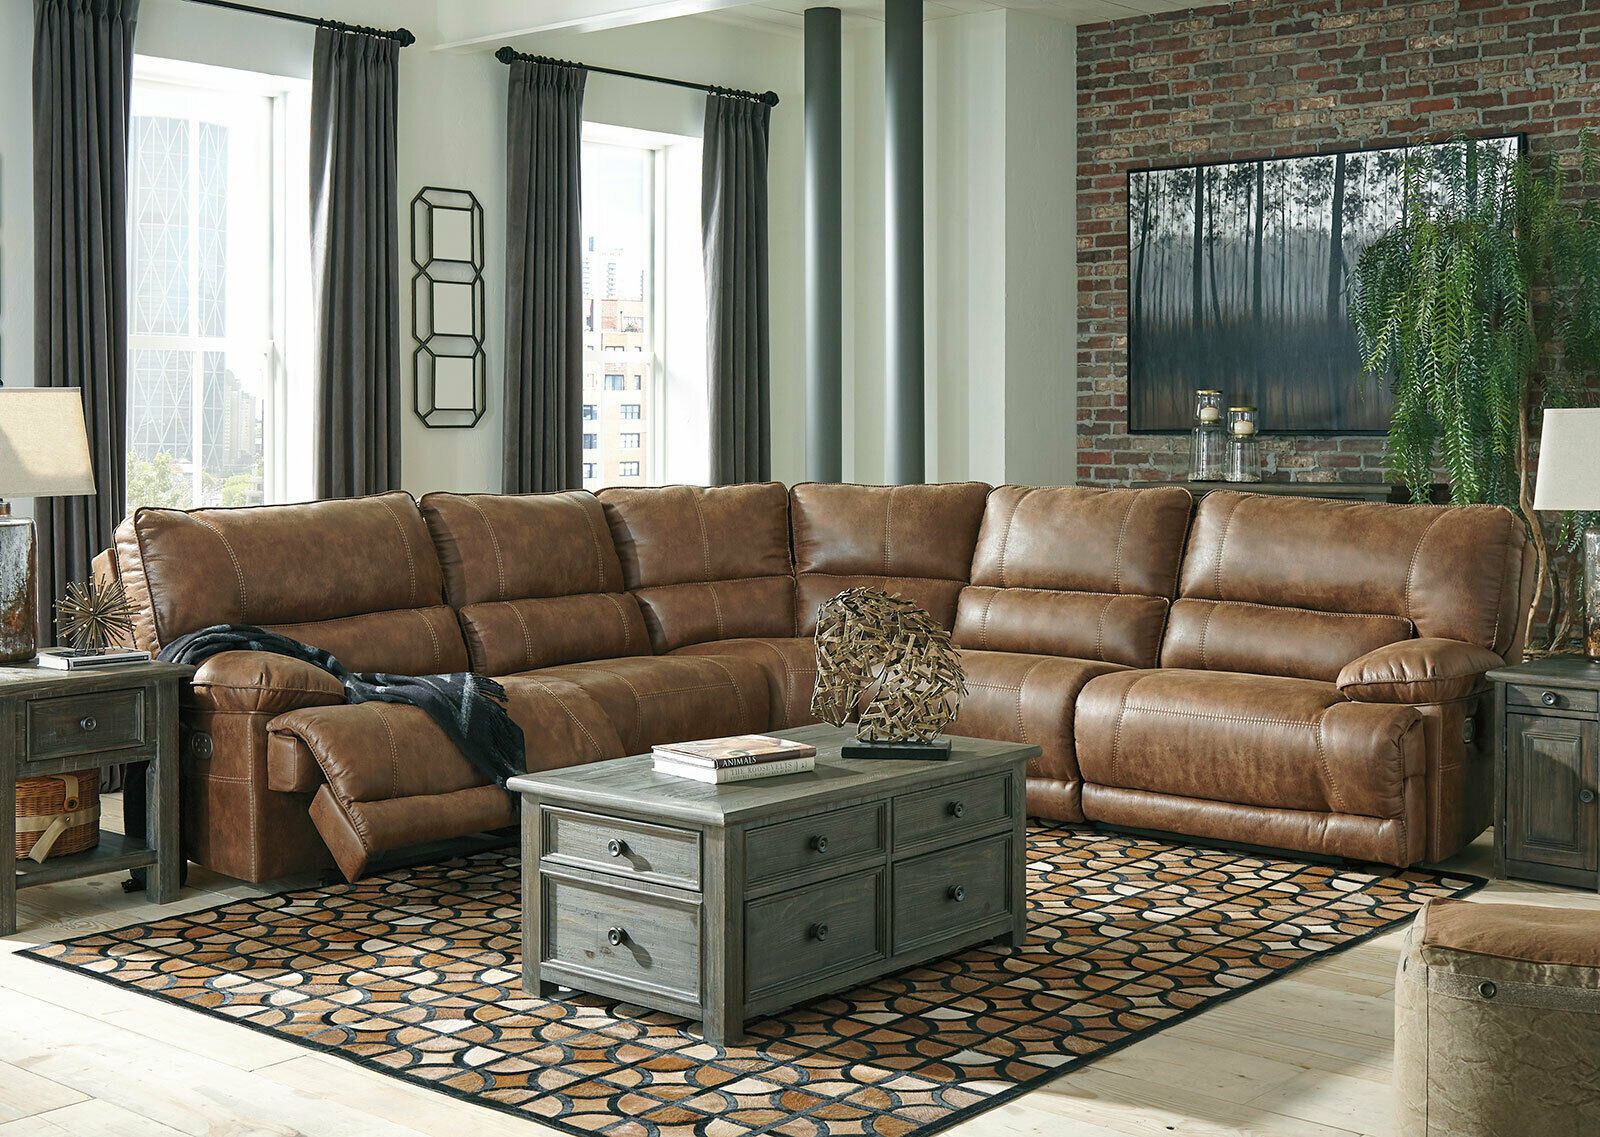 Hamburg 5pcs Sectional Living Room Brown Faux Leather Power Reclining Within Faux Leather Sectional Sofa Sets (View 3 of 21)